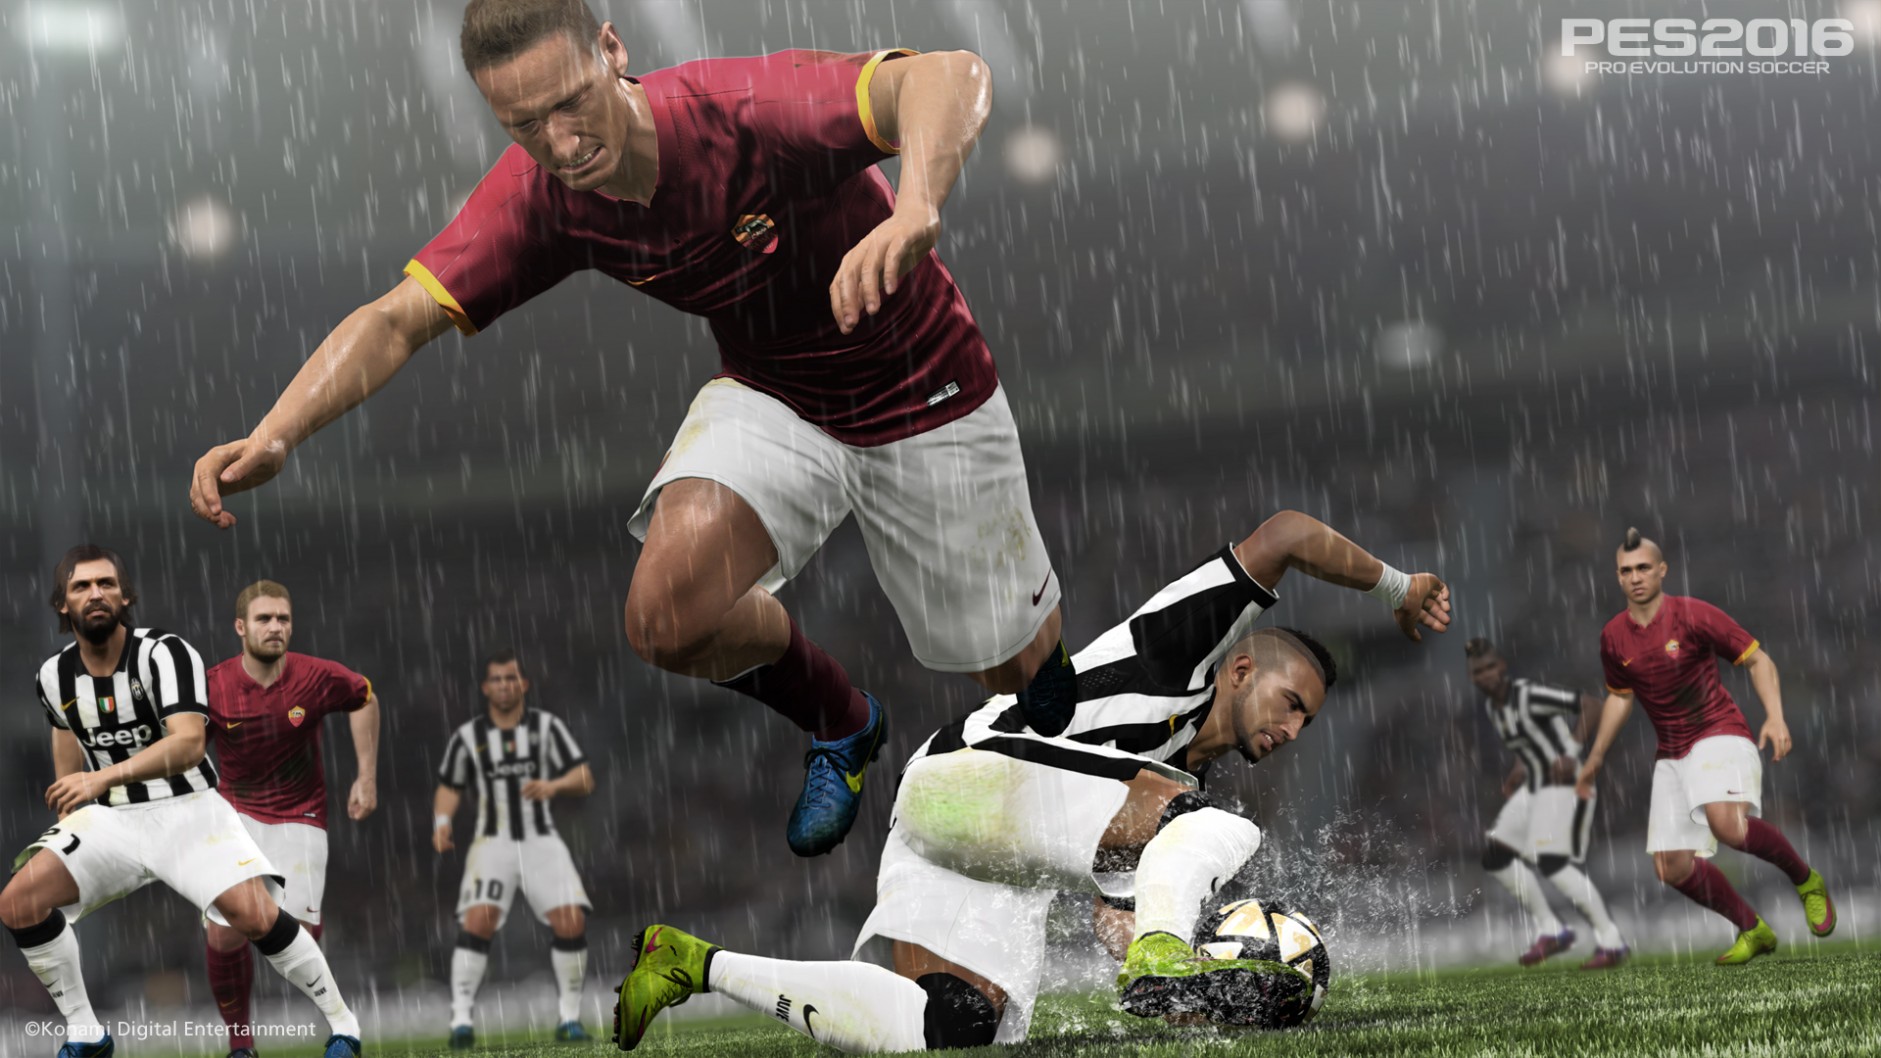 link to download pes 2016 from skidrow